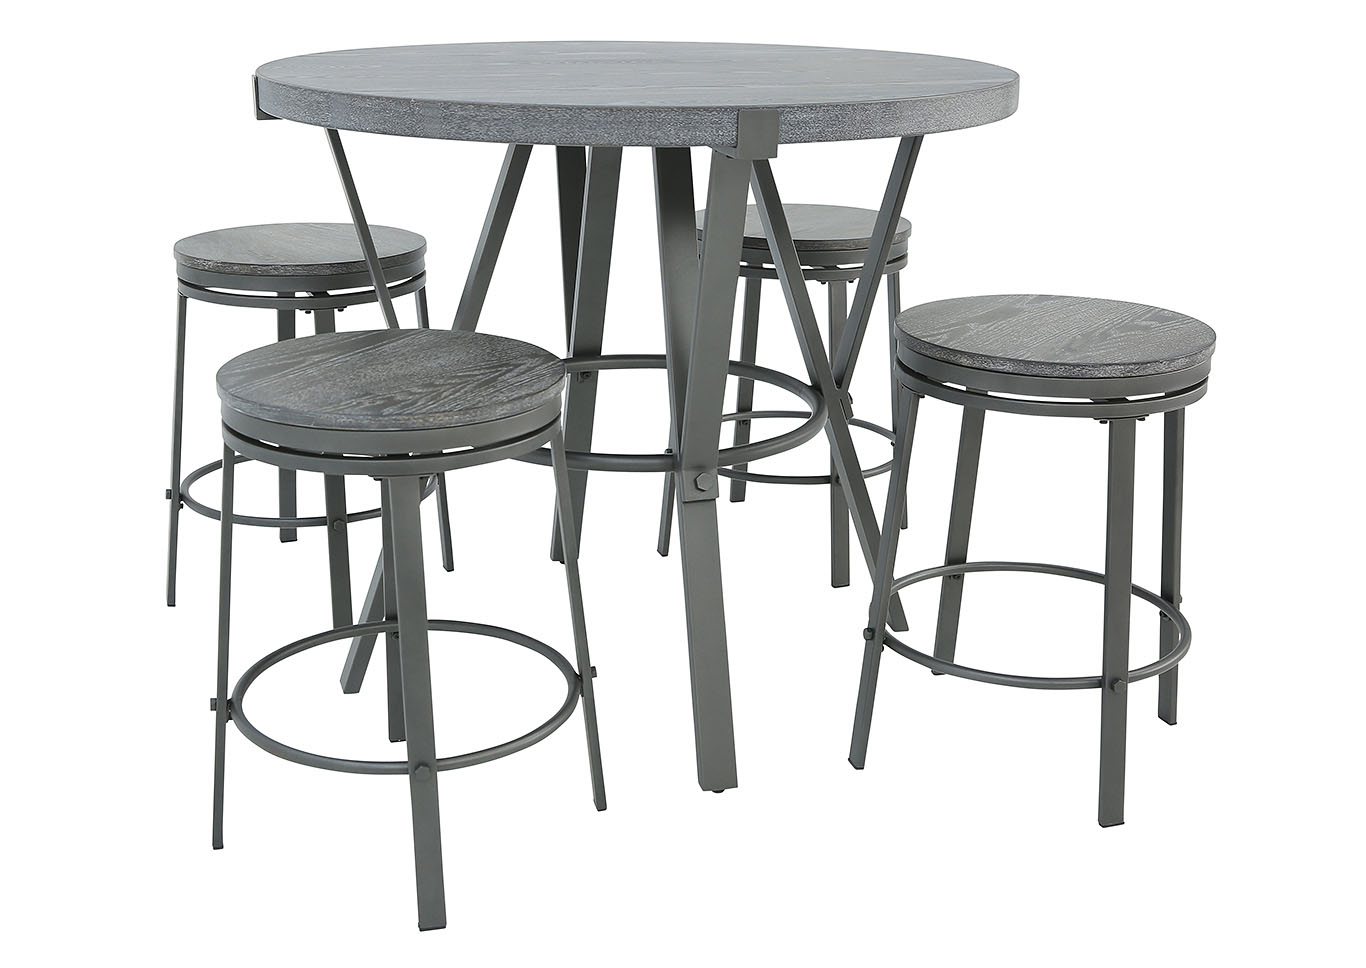 PORTLAND COUNTER HEIGHT DINETTE TABLE,STEVE SILVER COMPANY